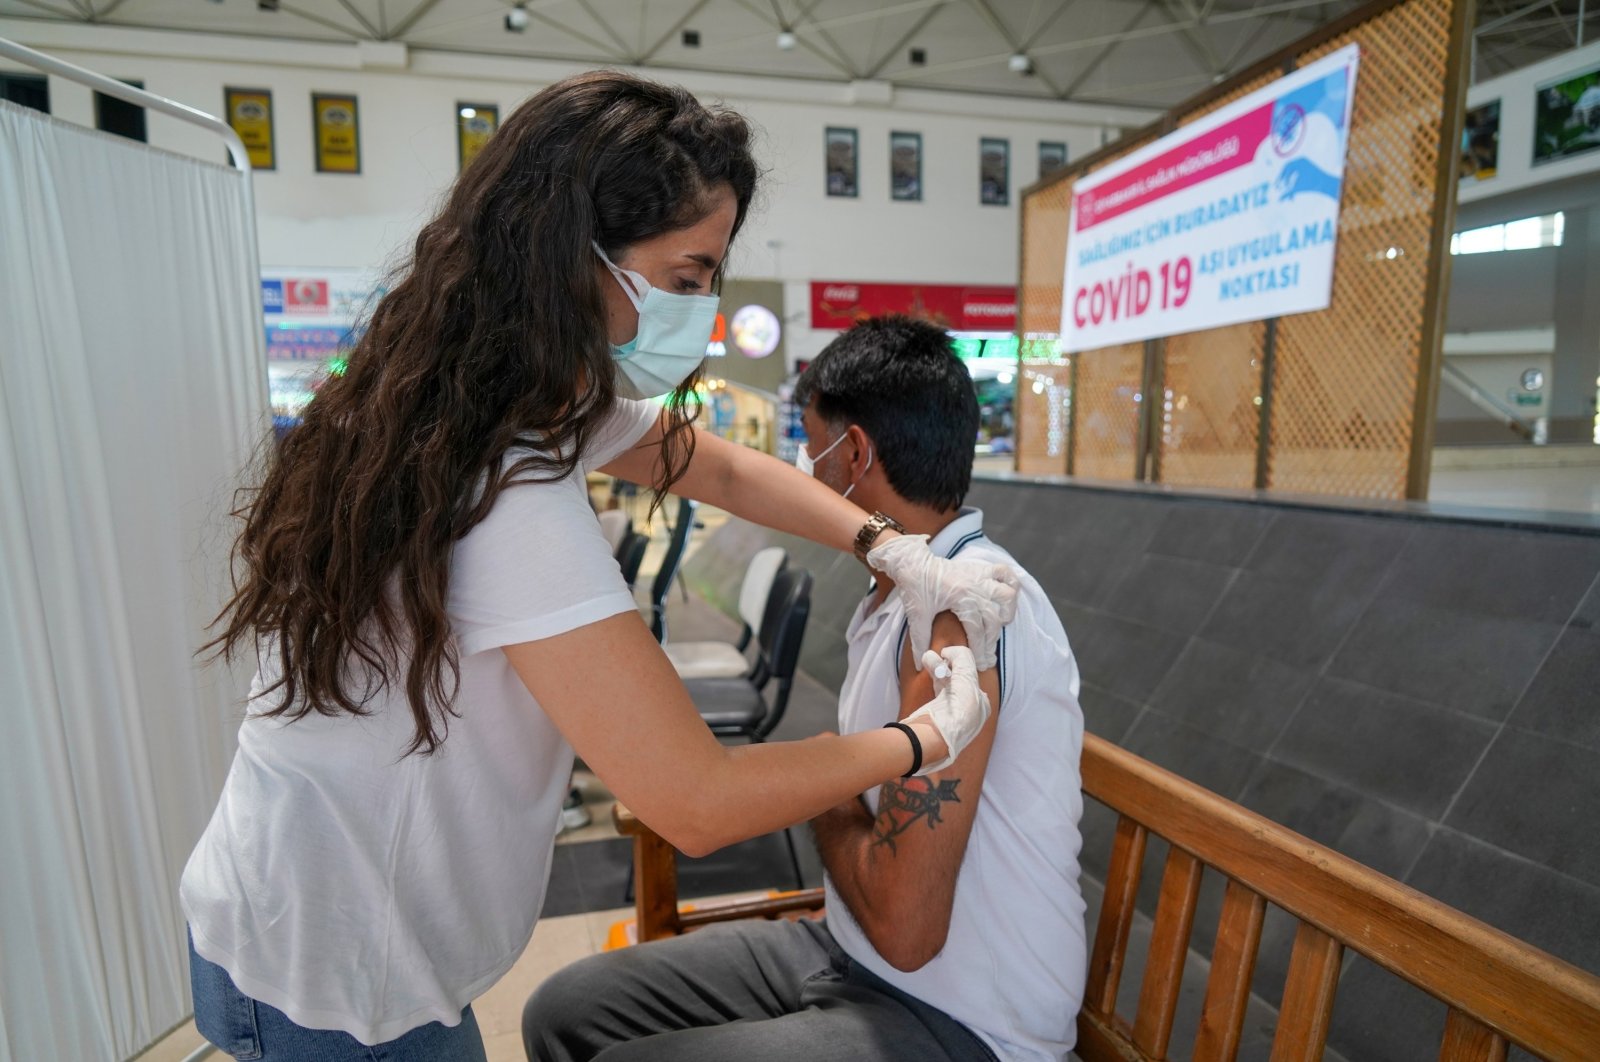 A man gets vaccinated at a vaccination spot inside a bus terminal, in Diyarbakır, southeastern Turkey, July 1, 2021. (İHA PHOTO) 